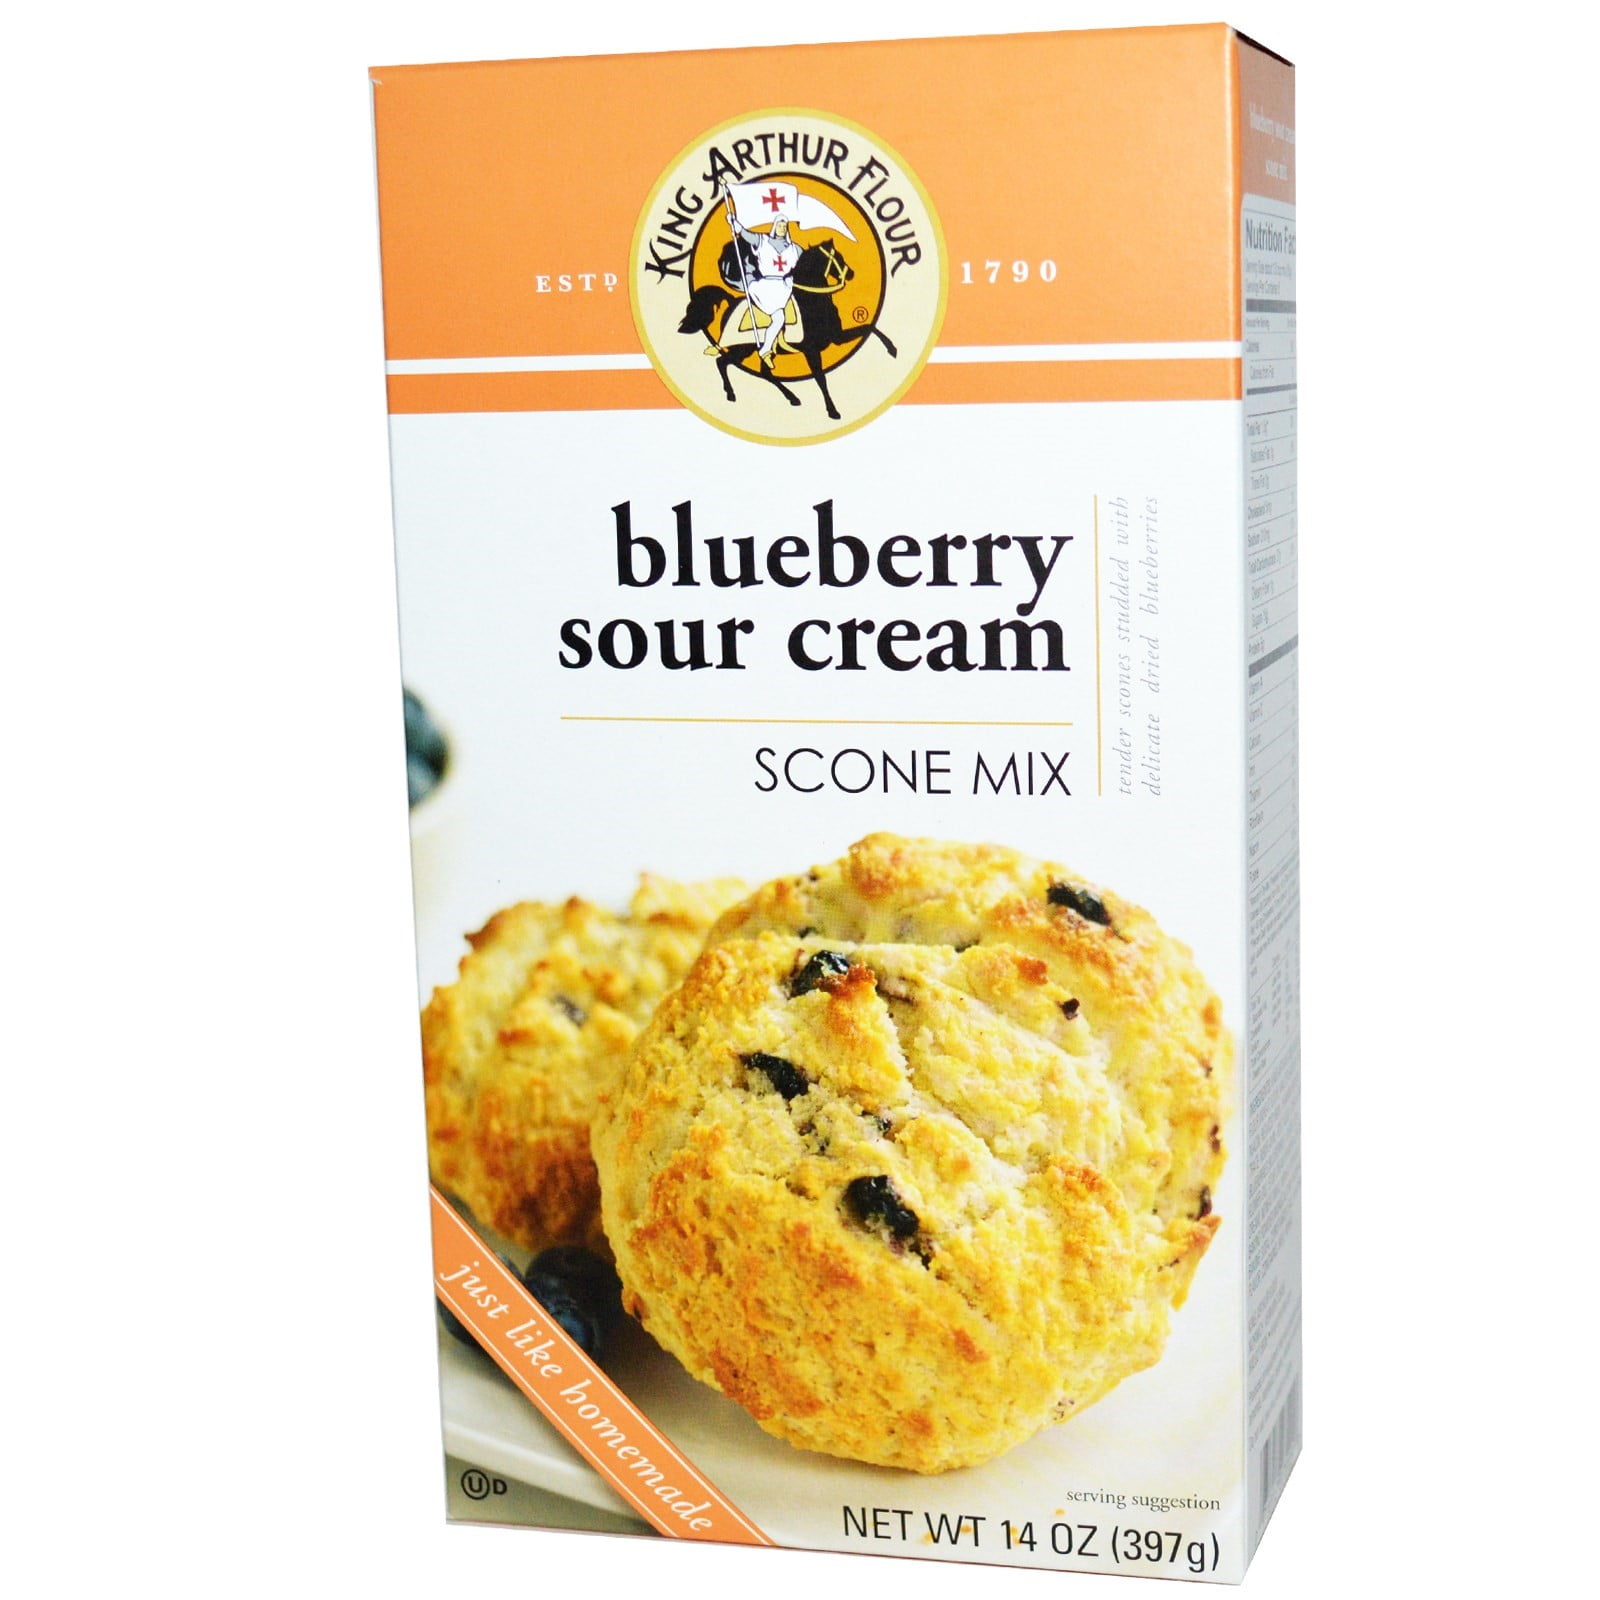 Scone and Muffin Scoop  King Arthur Baking Company